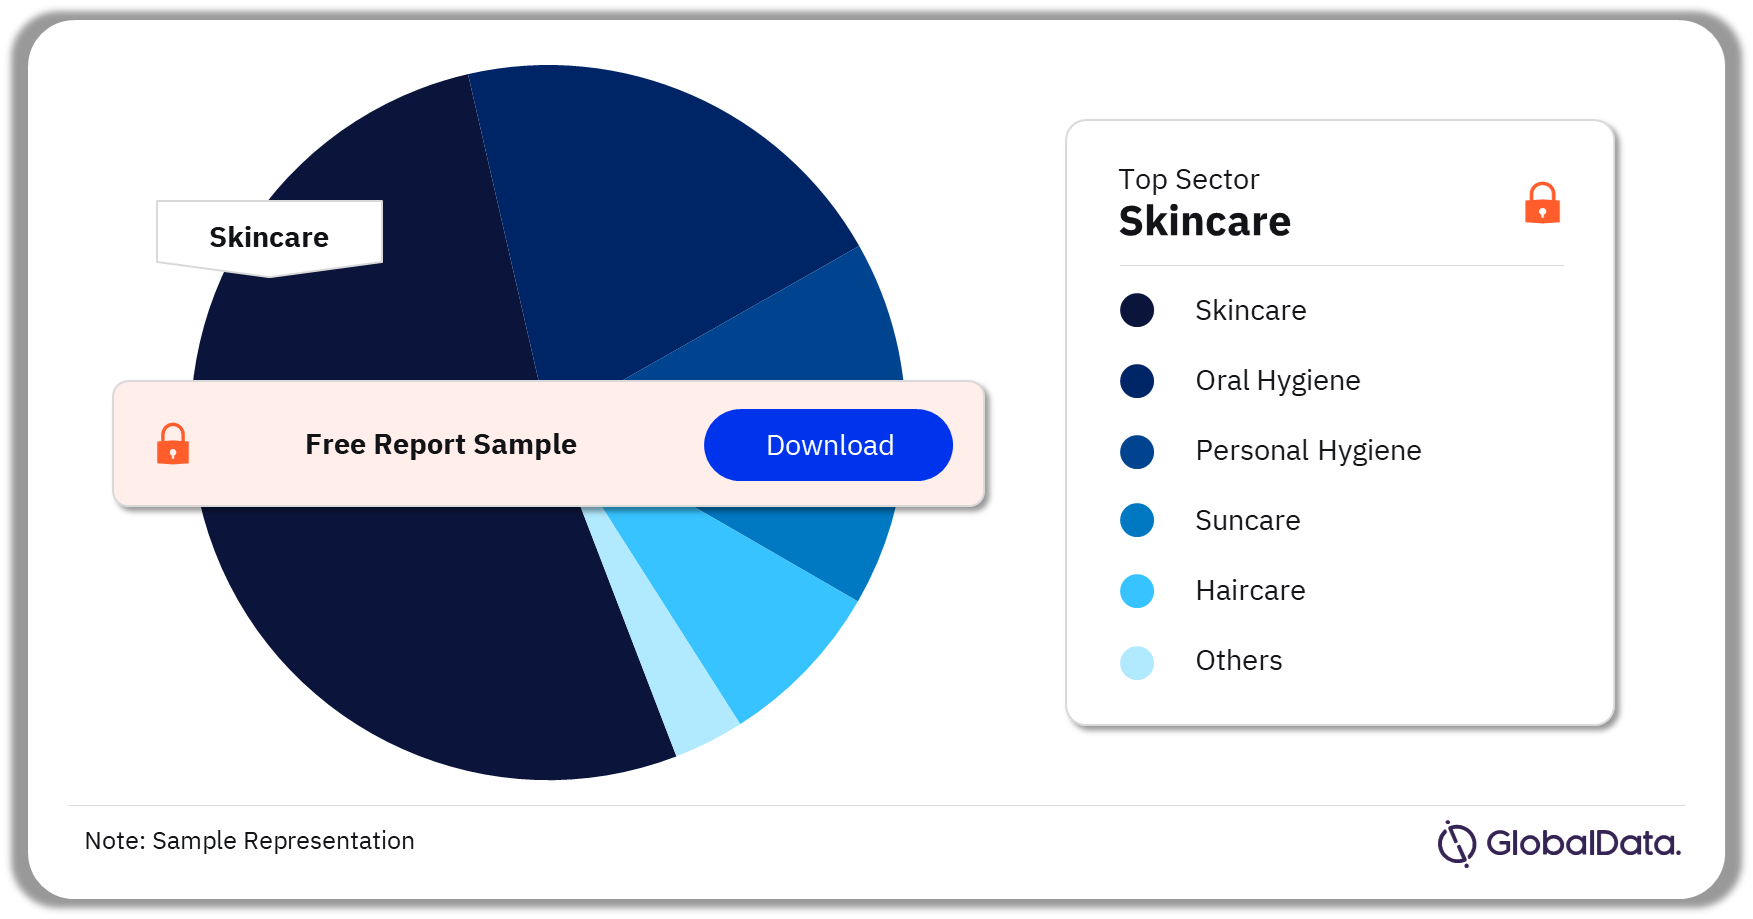 Western Europe Health and Beauty Market Analysis by Sectors, 2022 (%)